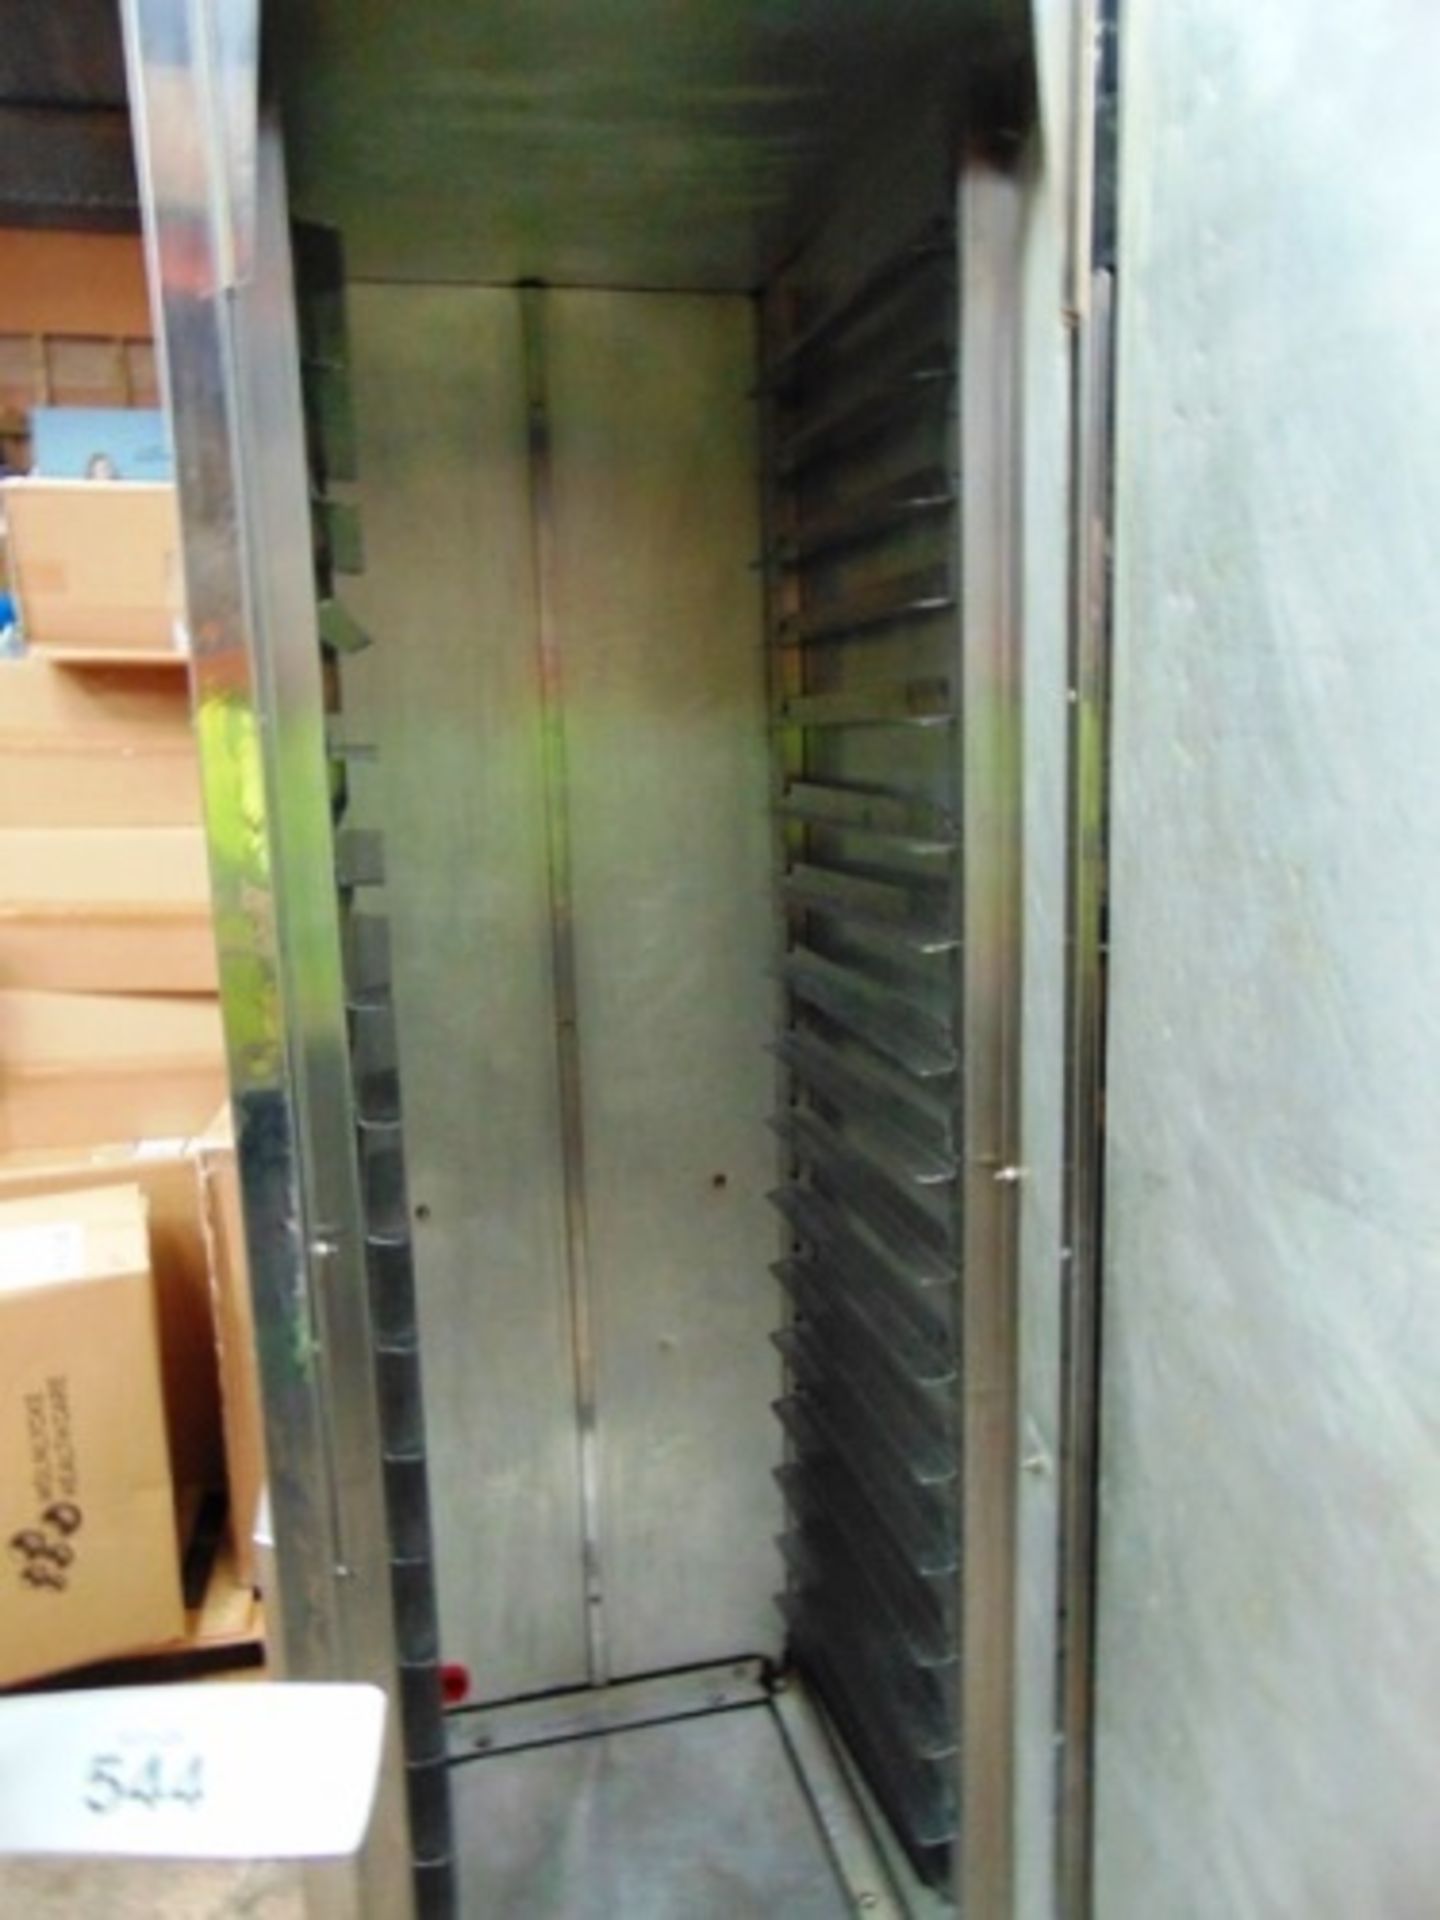 Mono stainless steel single door mobile proofer, no shelves, 610mm(W) x 890mm(D) x 1920mm(H) - - Image 3 of 3